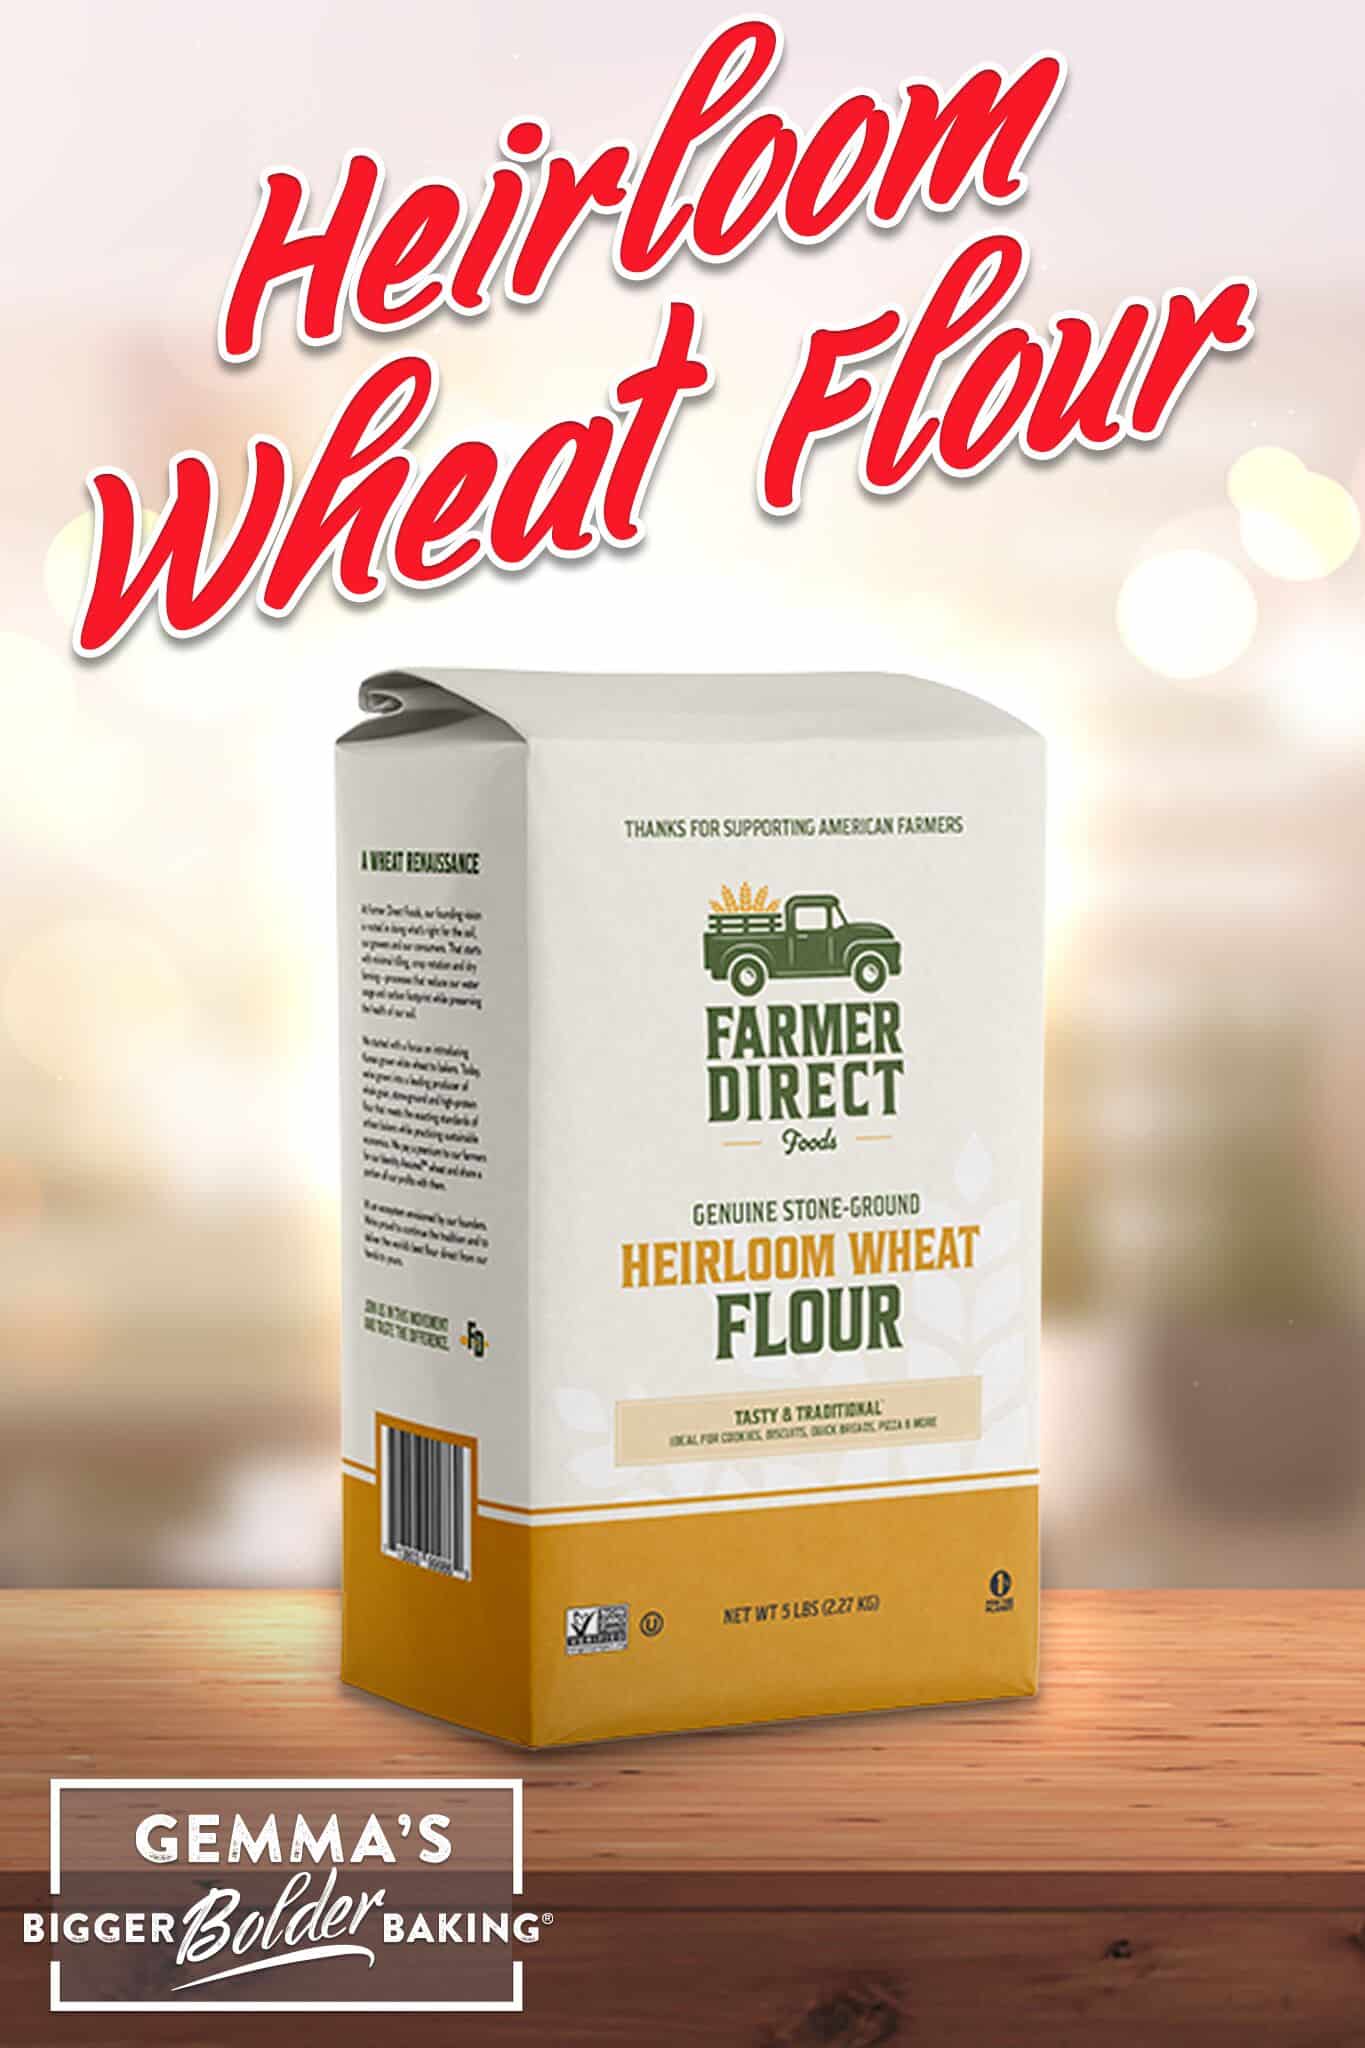 Ultimate Guide to 10 Types of Flour for Baking: Heirloom Flour, 1)with protein content of 10.5%, 2)finely textured with a robust wheat flavor 3)best for sourdough, pizza dough, brownies, cookies